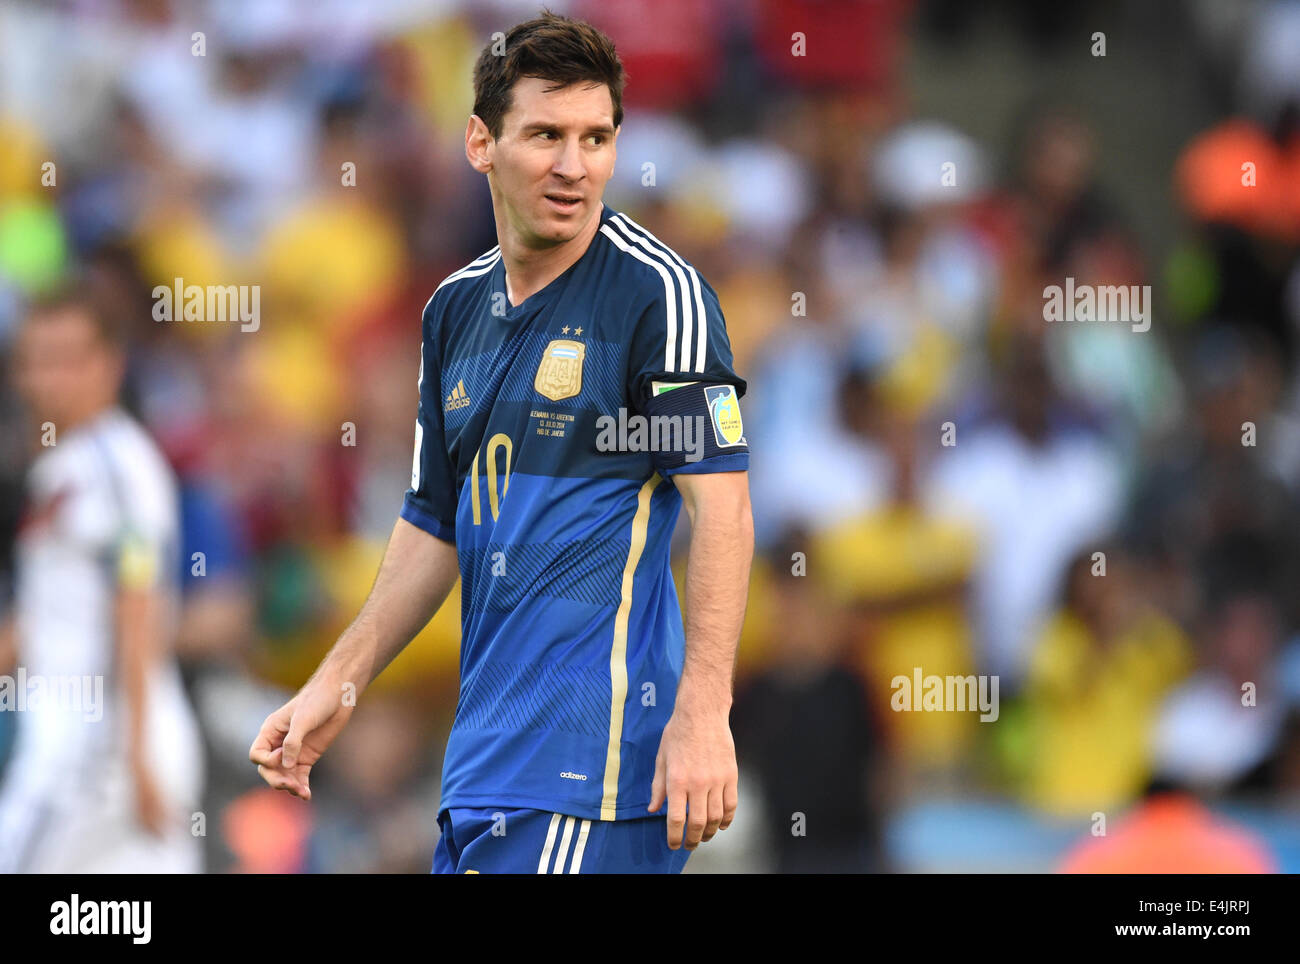 Rio de Janeiro, Brazil. 13th July, 2014. Lionel Messi of Argentina looks on during the FIFA World Cup 2014 final soccer match between Germany and Argentina at the Estadio do Maracana in Rio de Janeiro, Brazil, 13 July 2014. Photo: Marcus Brandt/dpa/Alamy Live News Stock Photo